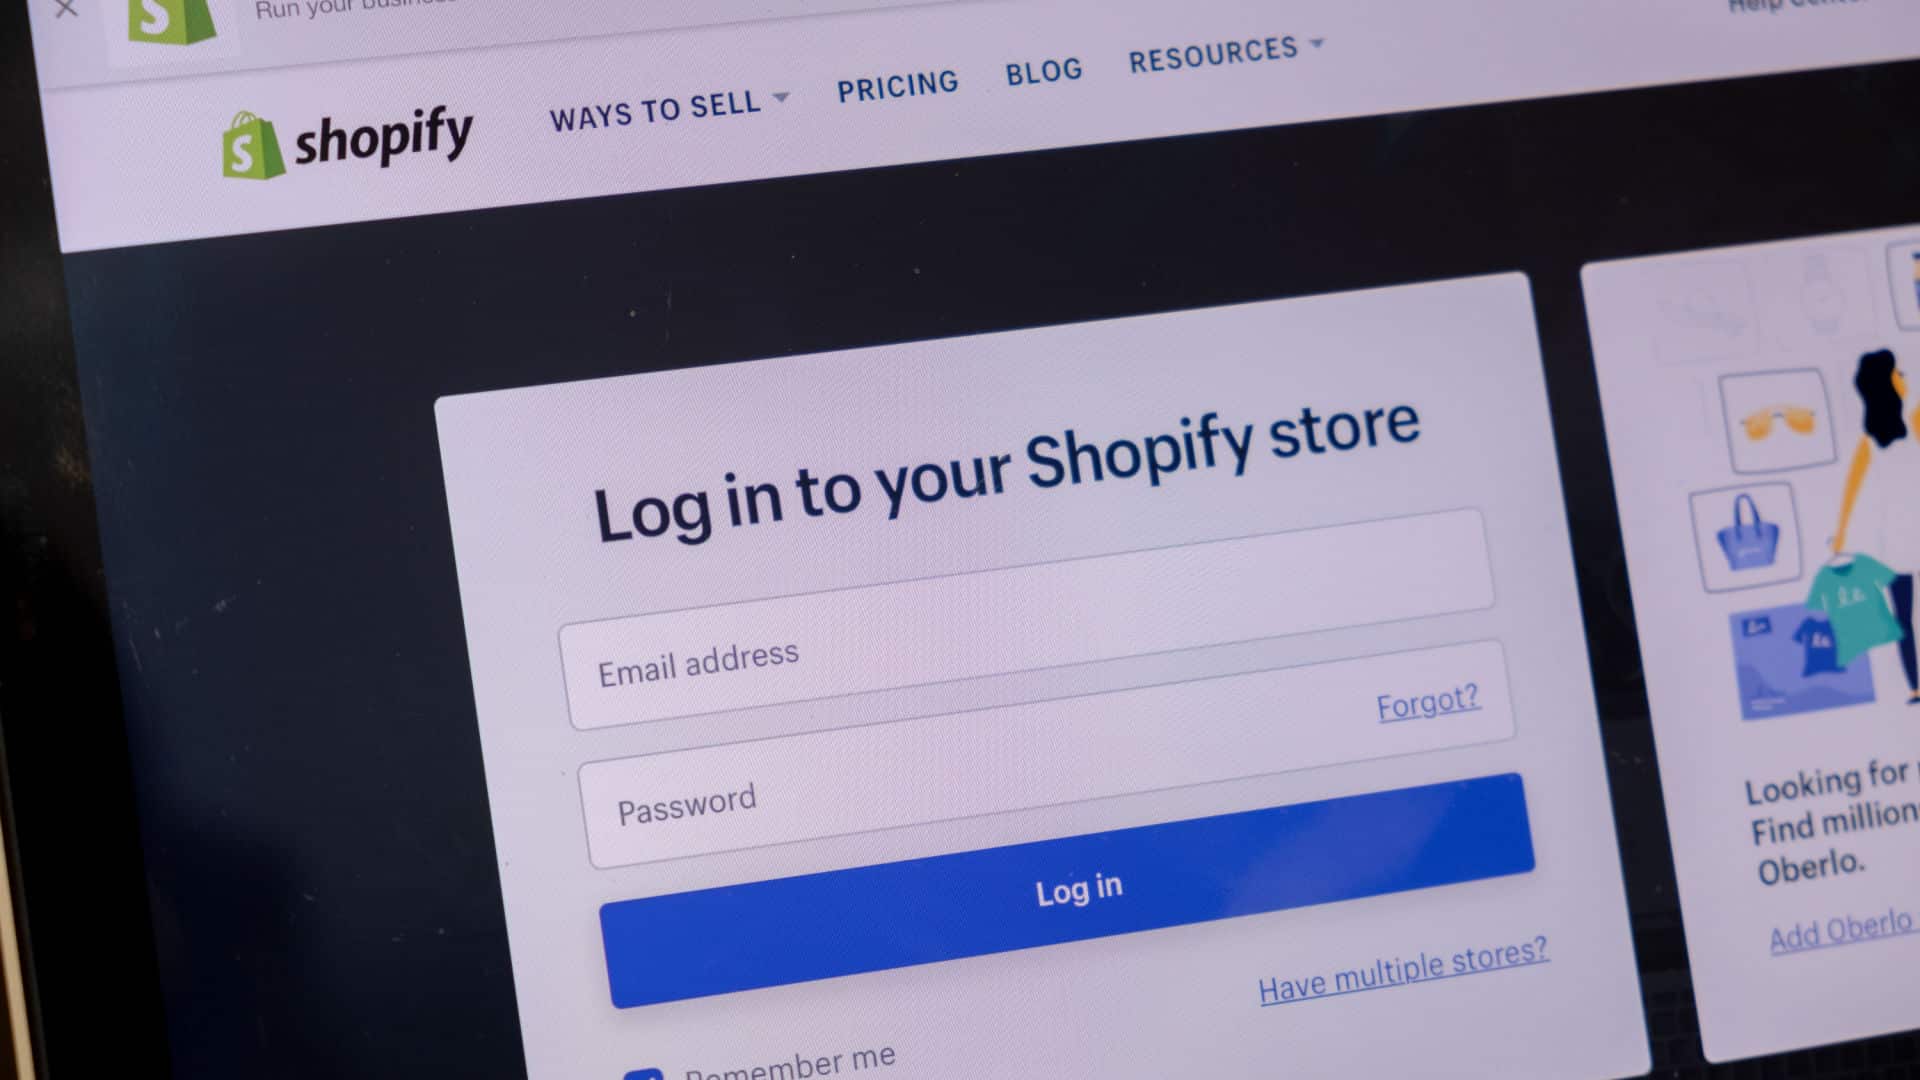 Commerce Components by Shopify gives large retailers new ways to use the platform